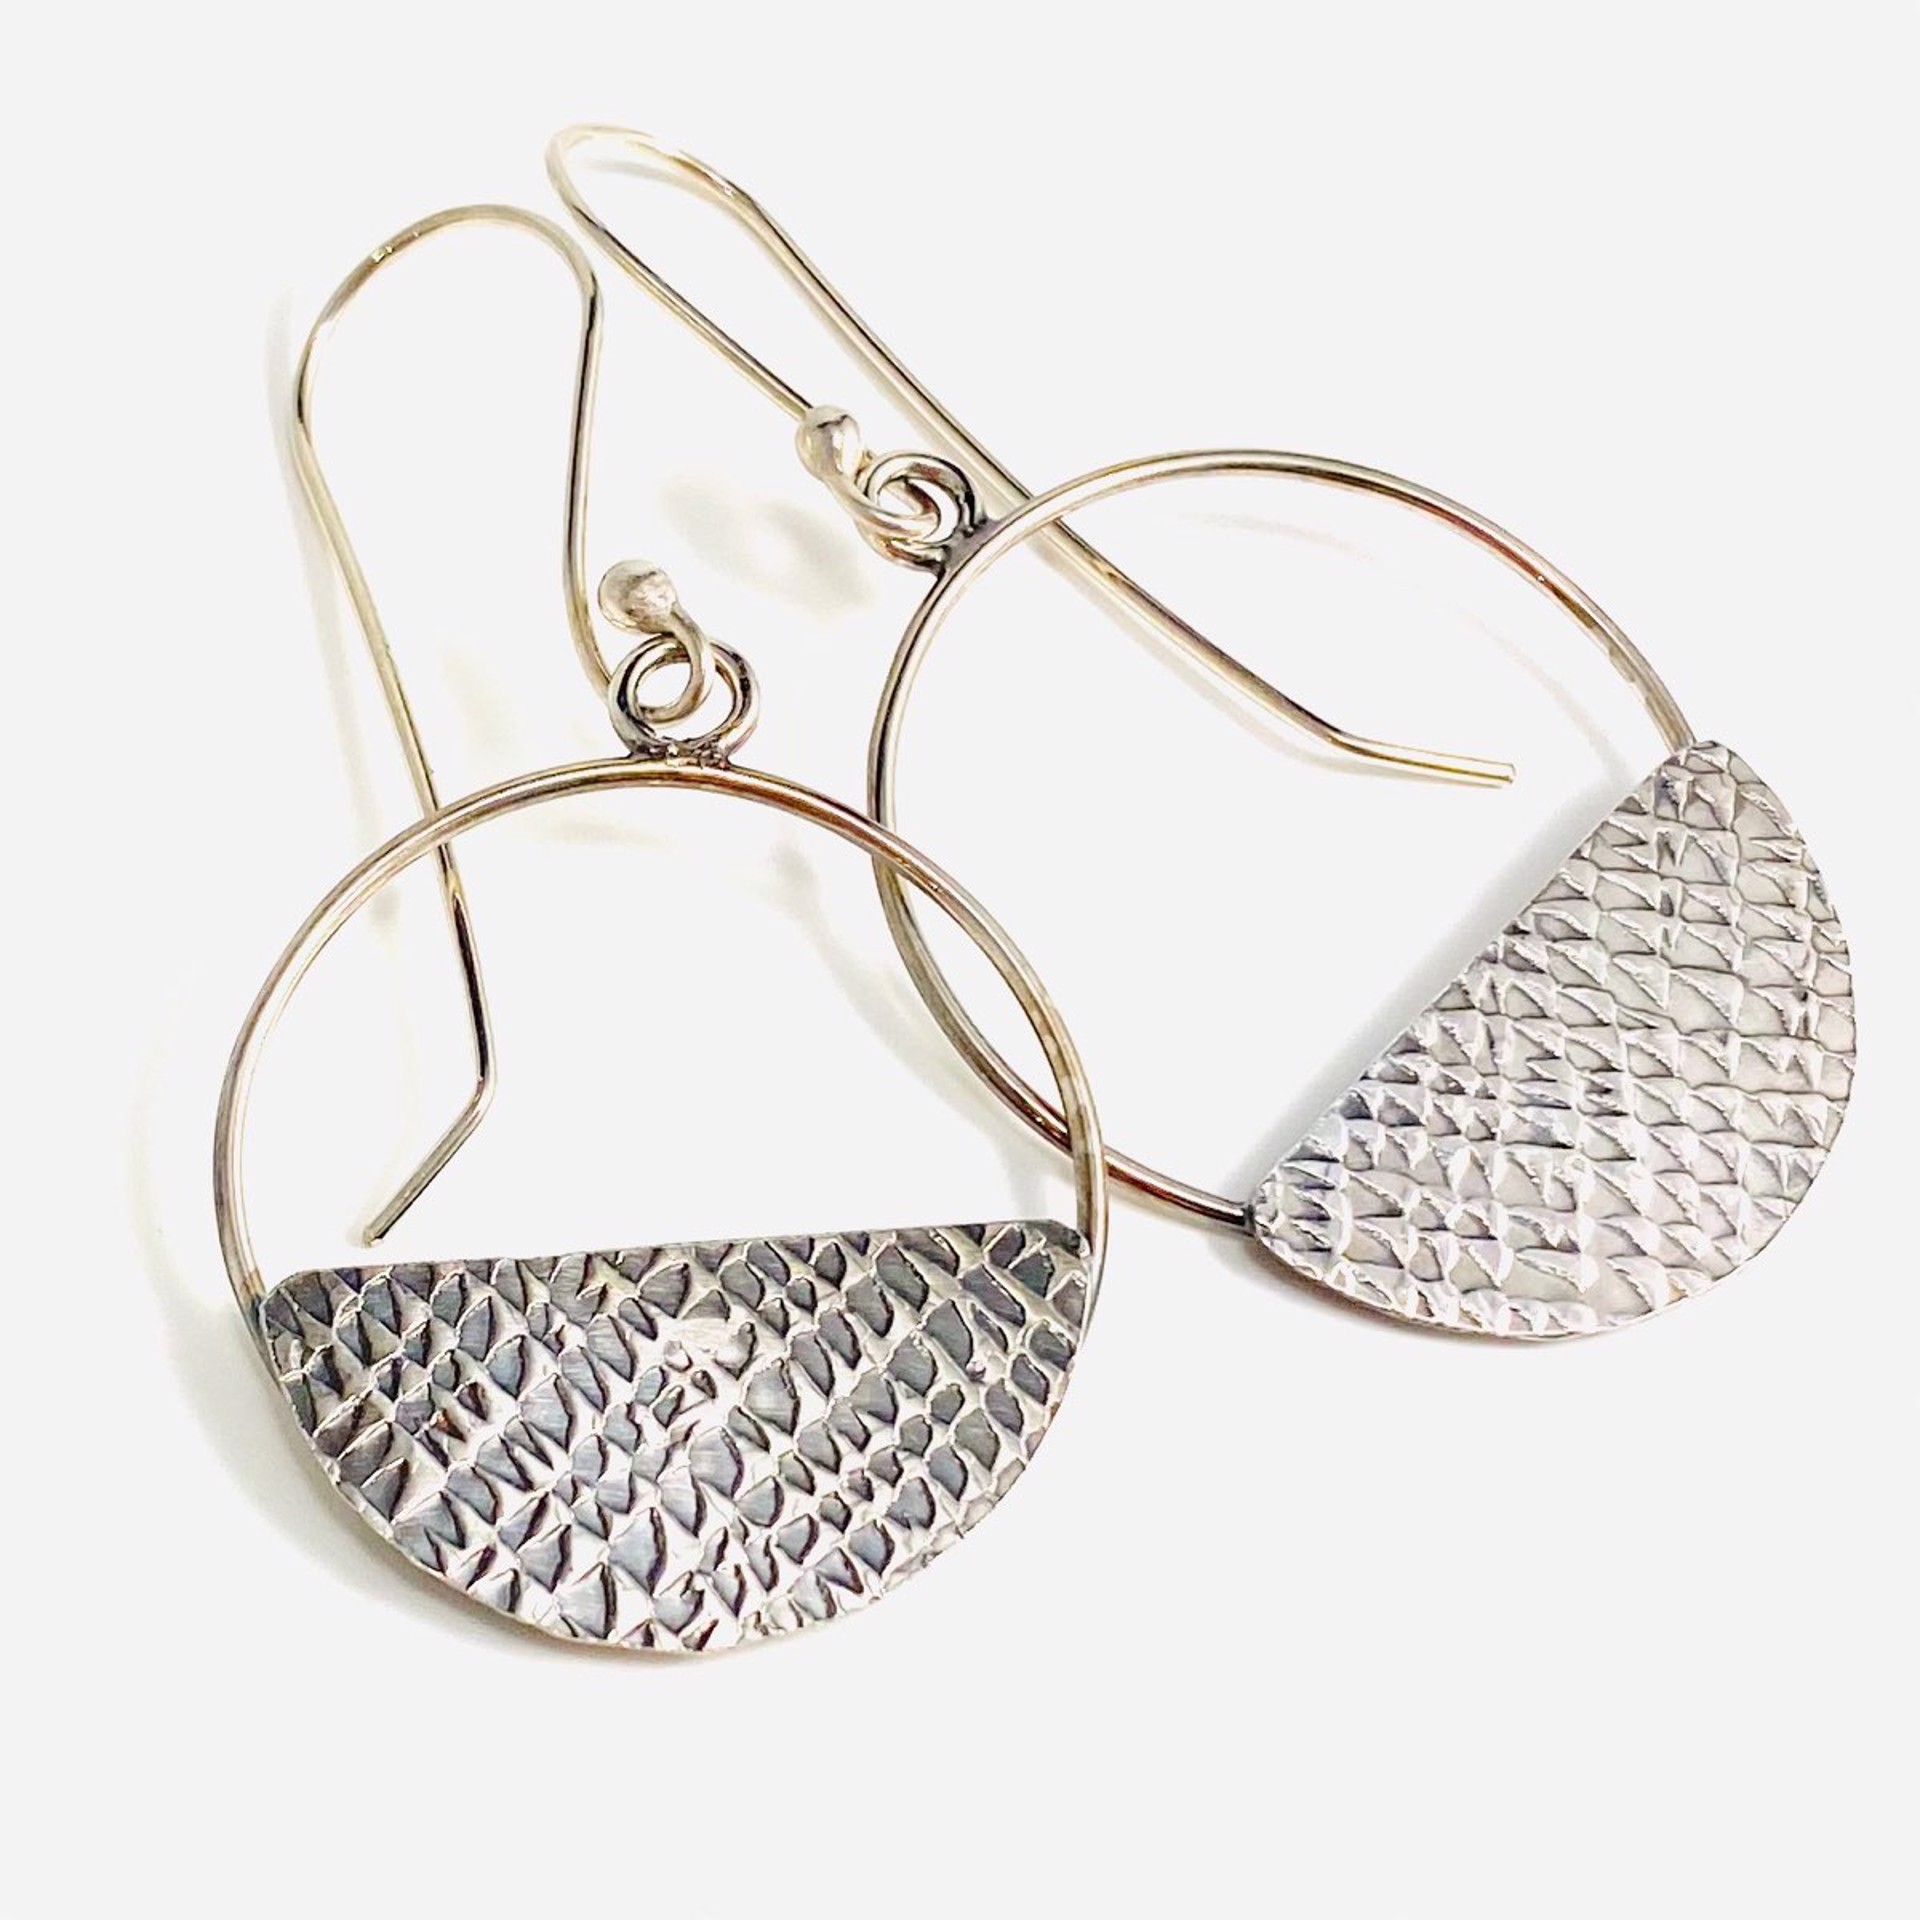 AB21-82 Basket Weave Circle Earrings by Anne Bivens